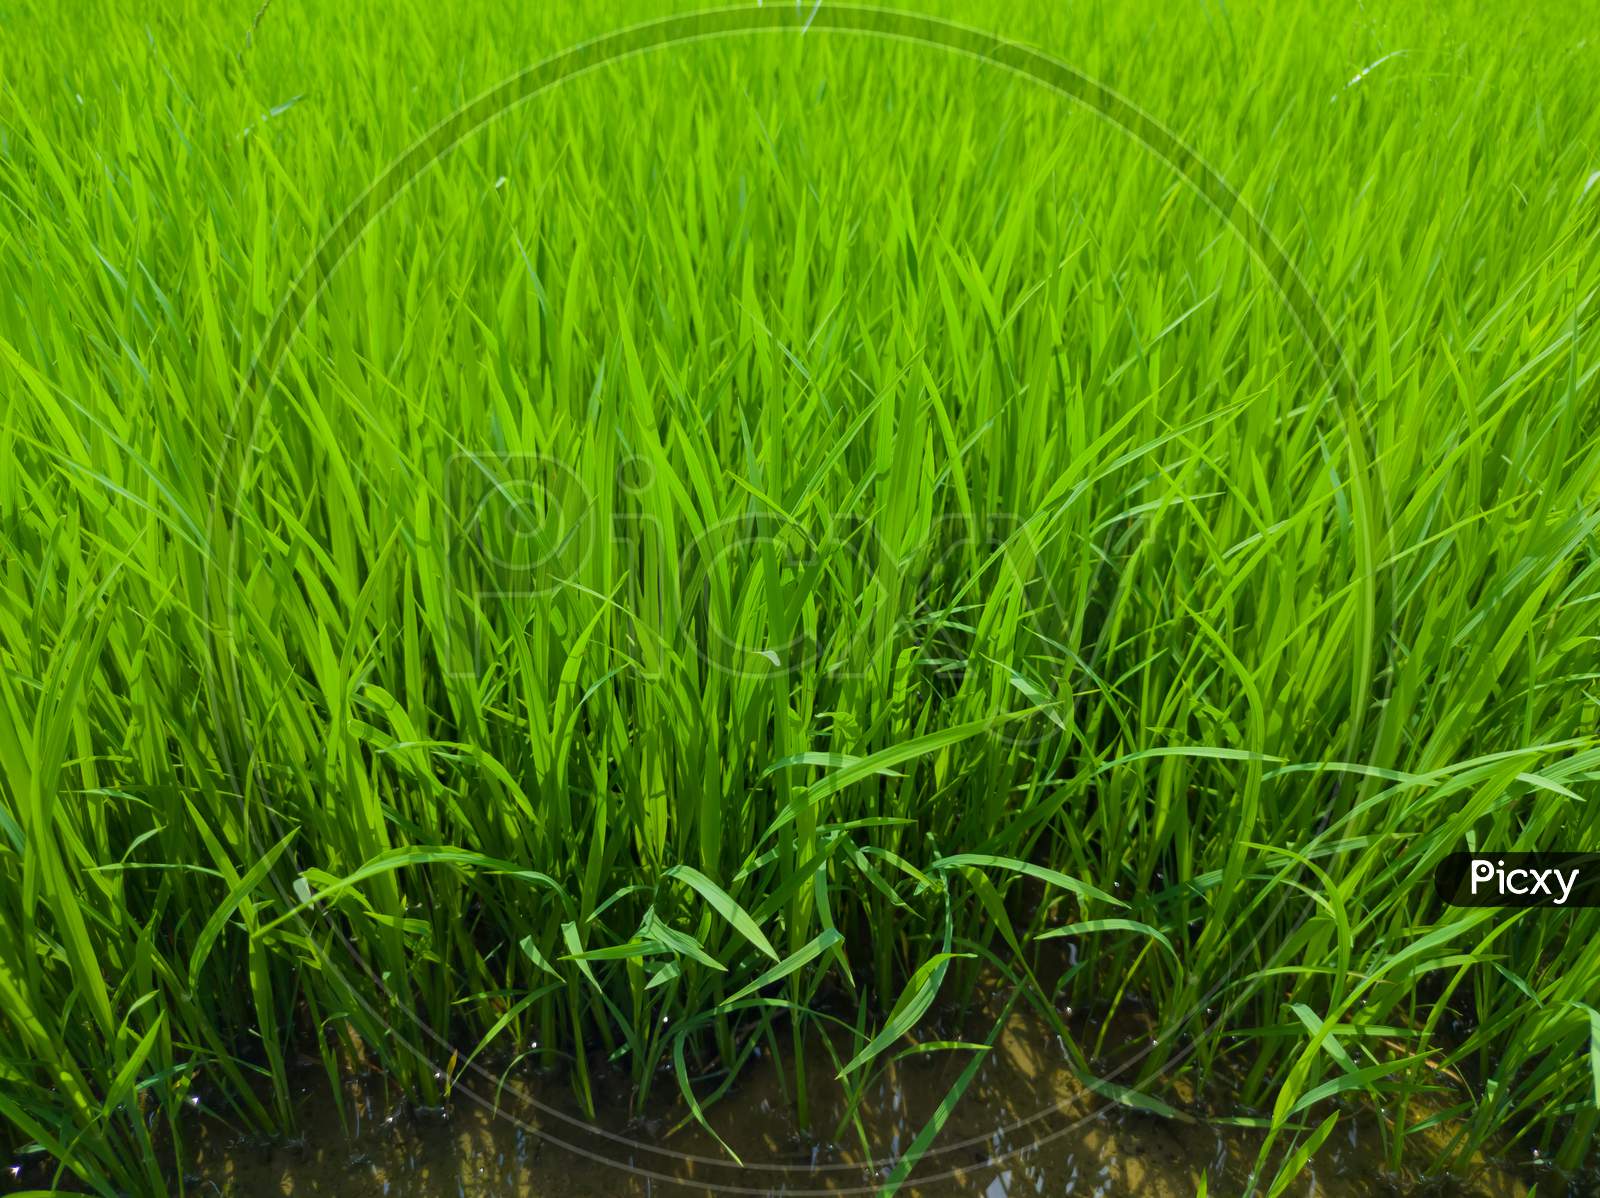 Paddy field in India. Paddy fields. Paddy leaves. Agriculture fields in India. Agriculture fields.